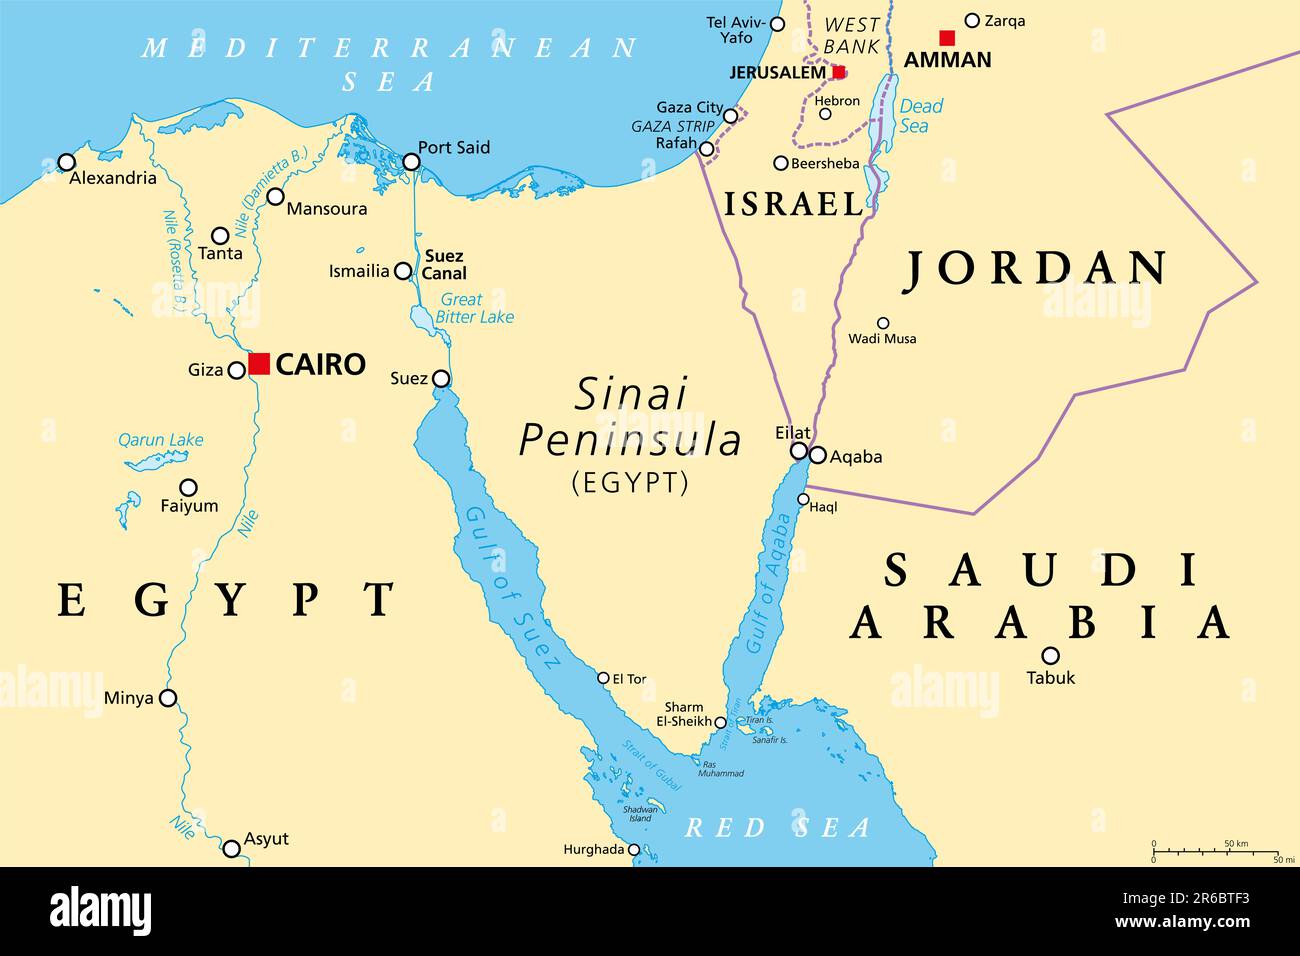 Sinai Peninsula region, political map. Peninsula in Egypt, located between the Mediterranean Sea and the Red Sea, land bridge between Asia and Africa. Stock Photo